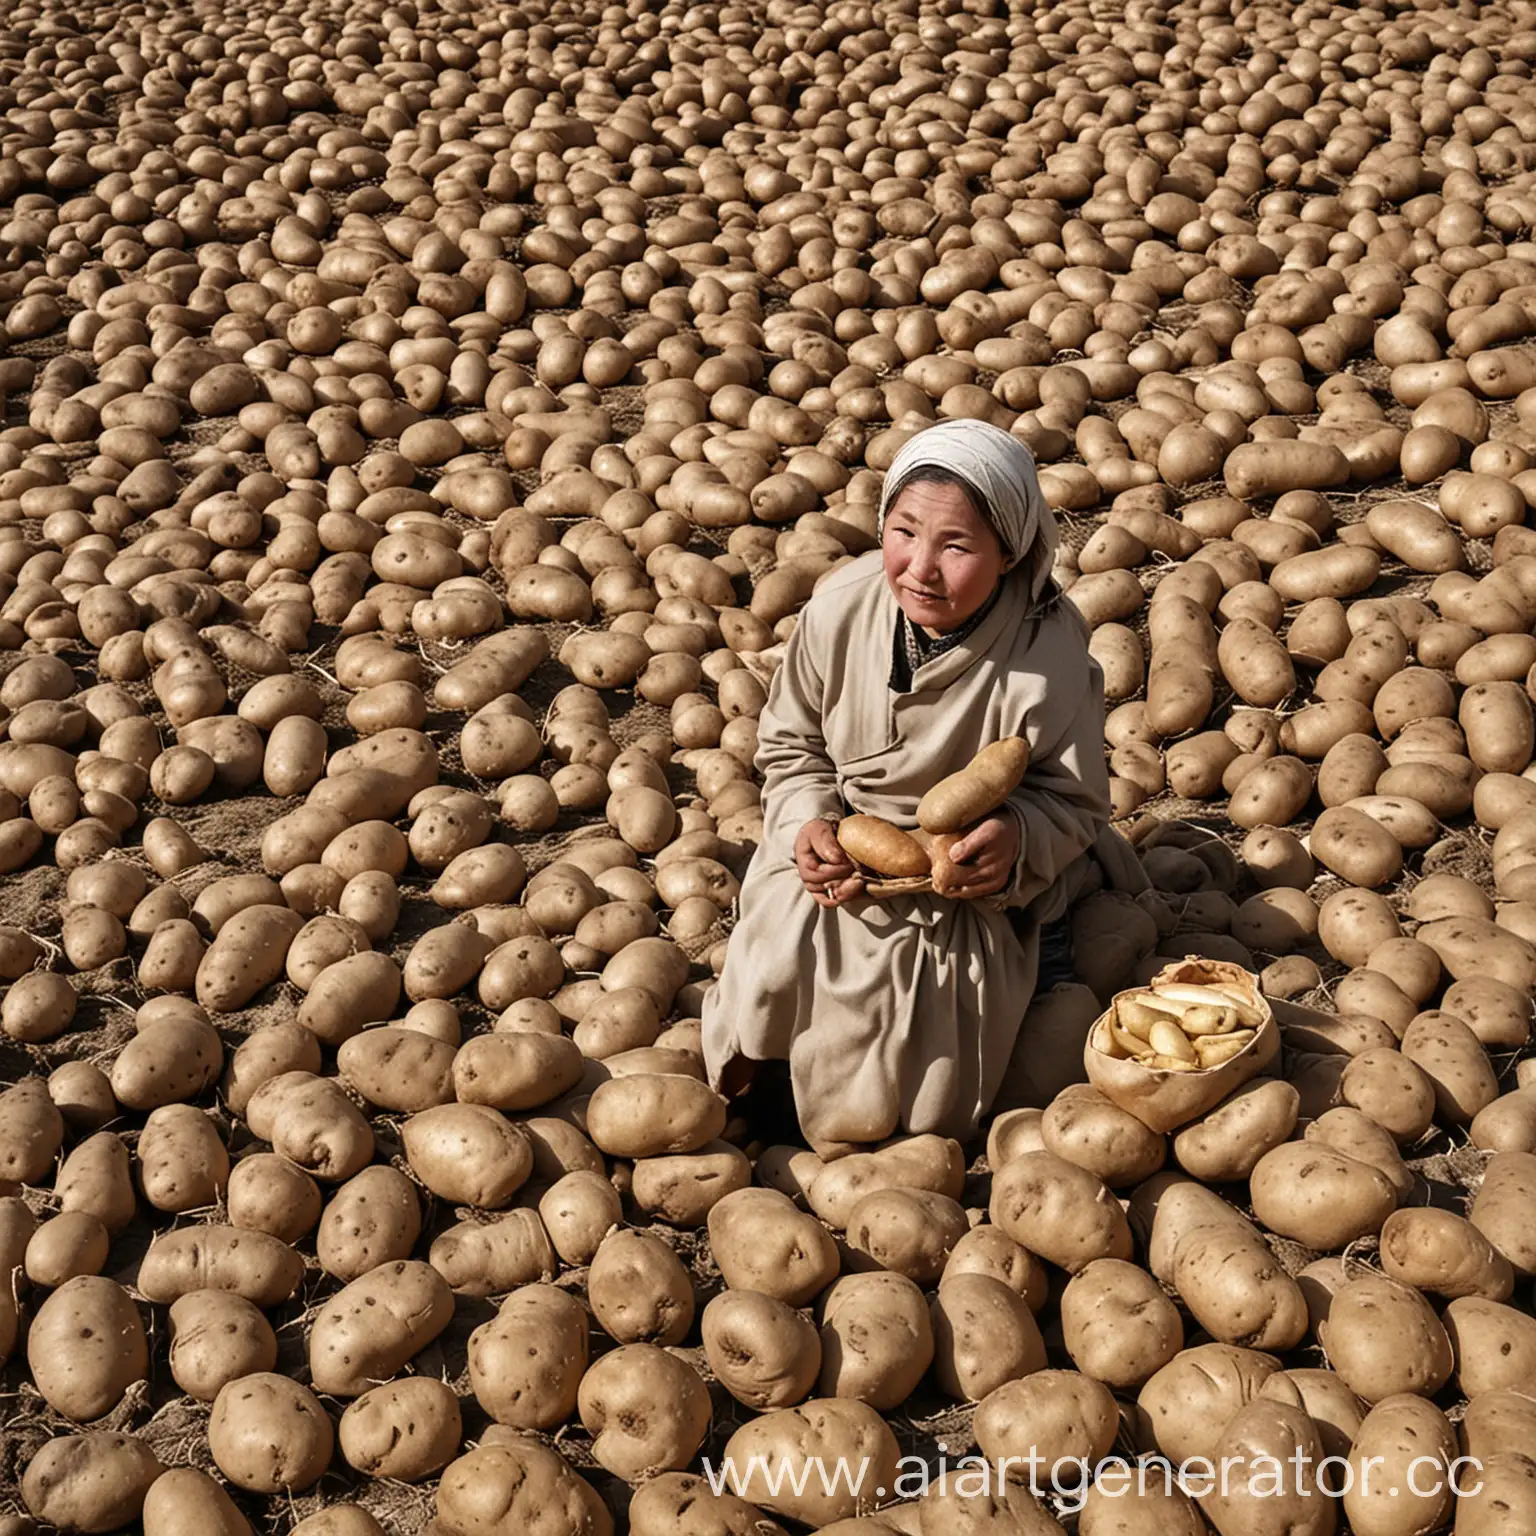 Kyrgyz-Collective-Farm-Harvesting-Bread-and-Potatoes-during-World-War-II